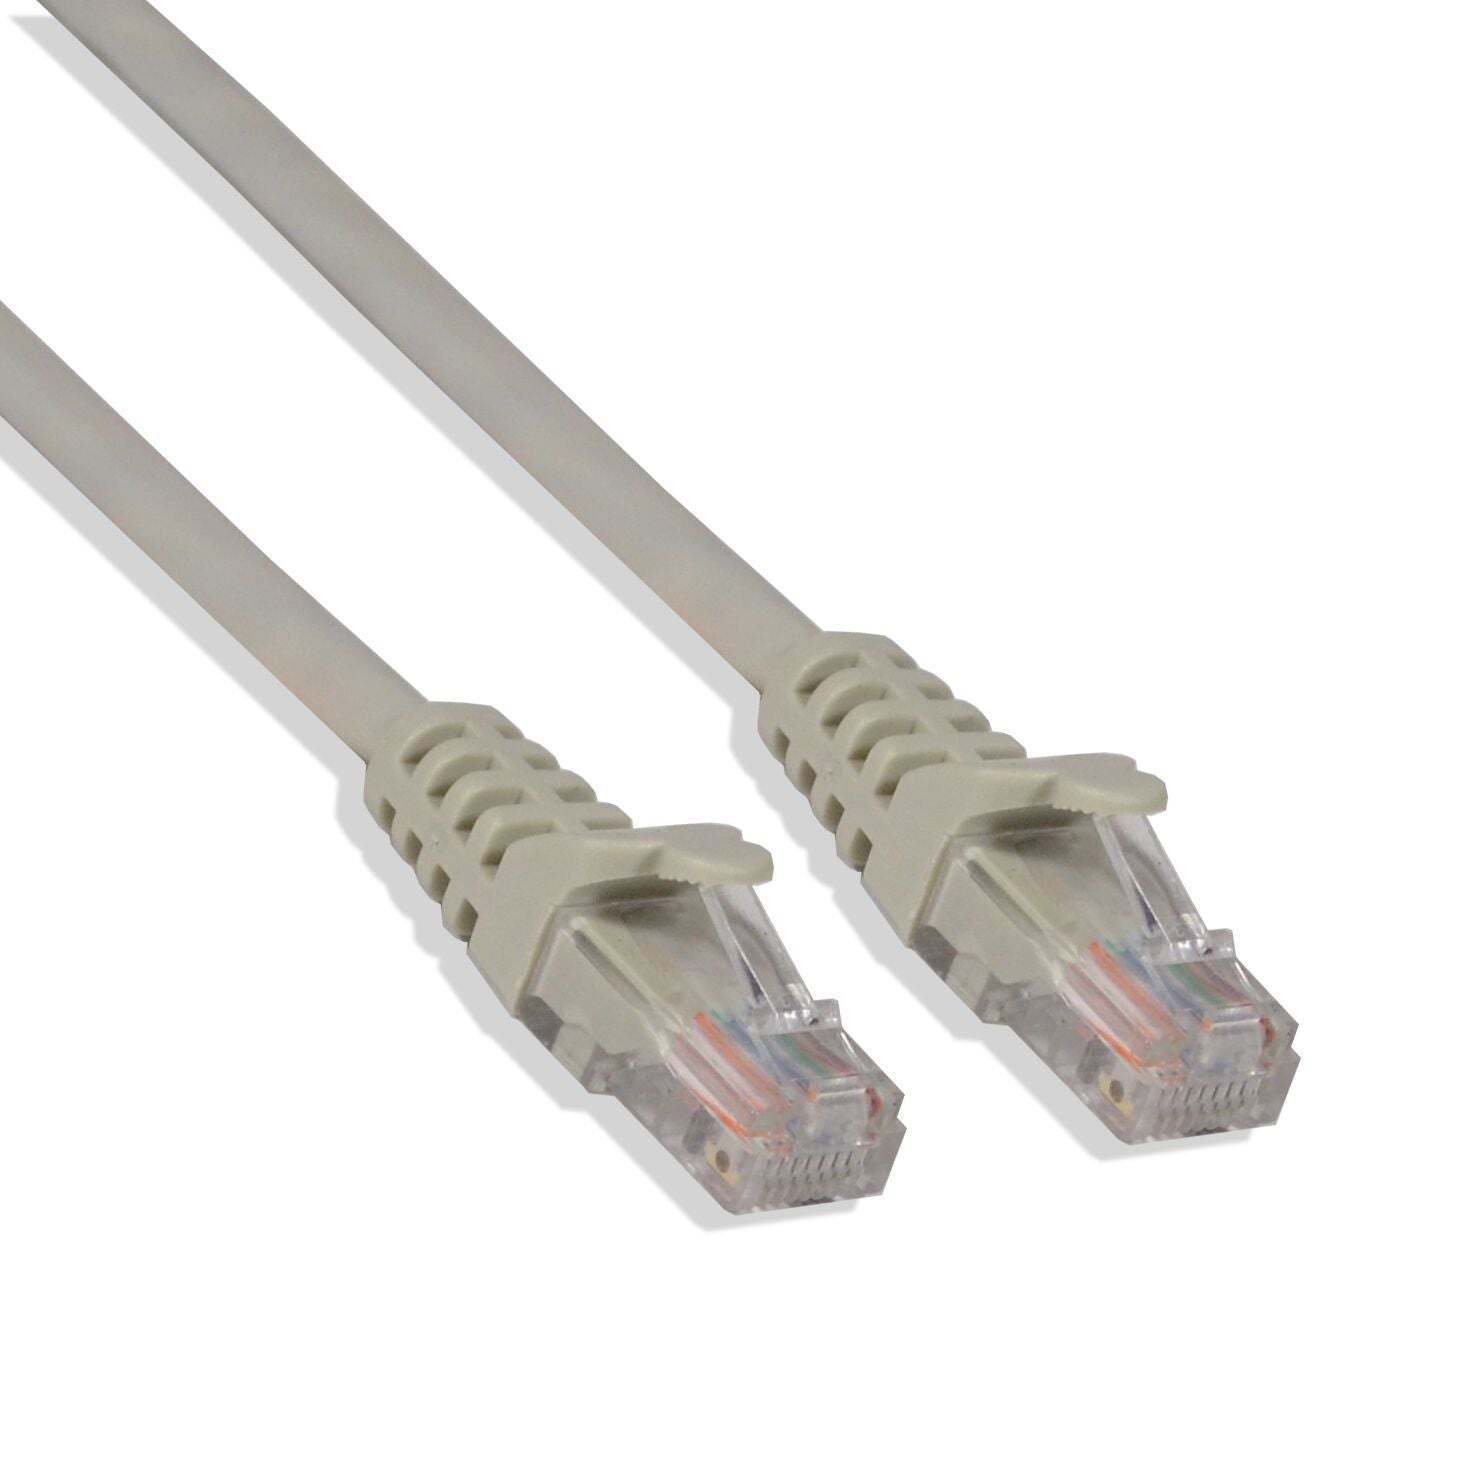 Logico Cat6 UTP Ethernet Patch Cable 550Mhz 24Awg Gray 100FT Wholesale